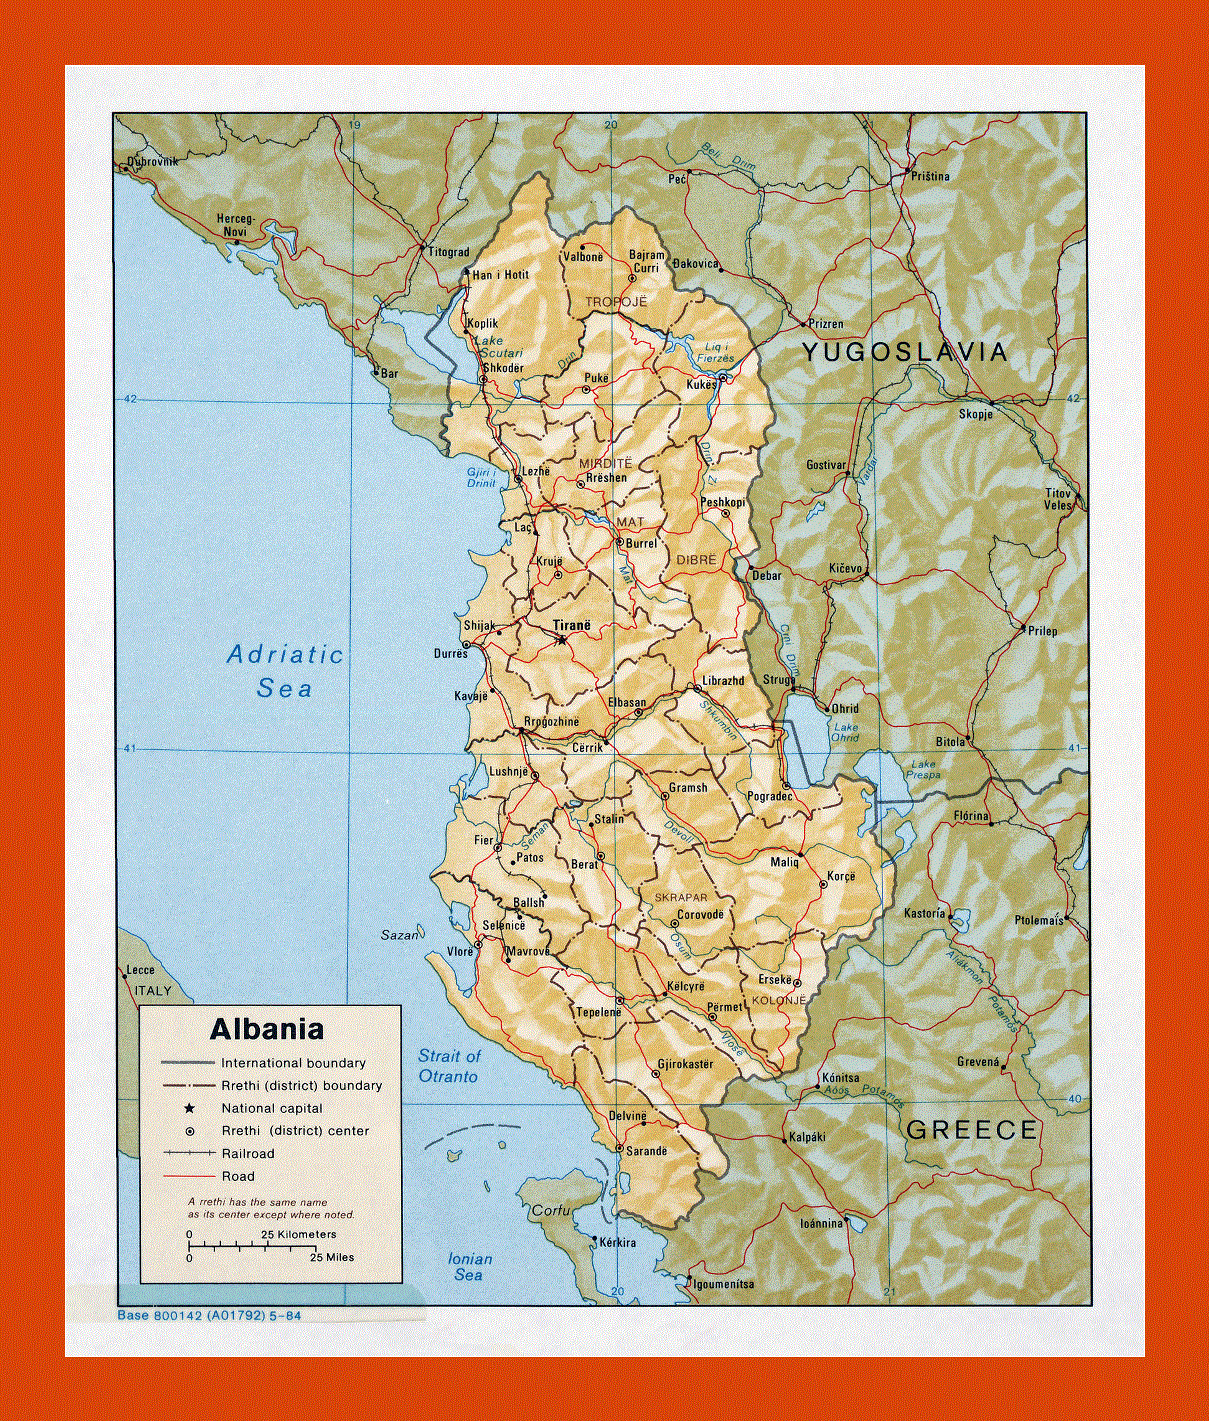 Political and administrative map of Albania - 1984